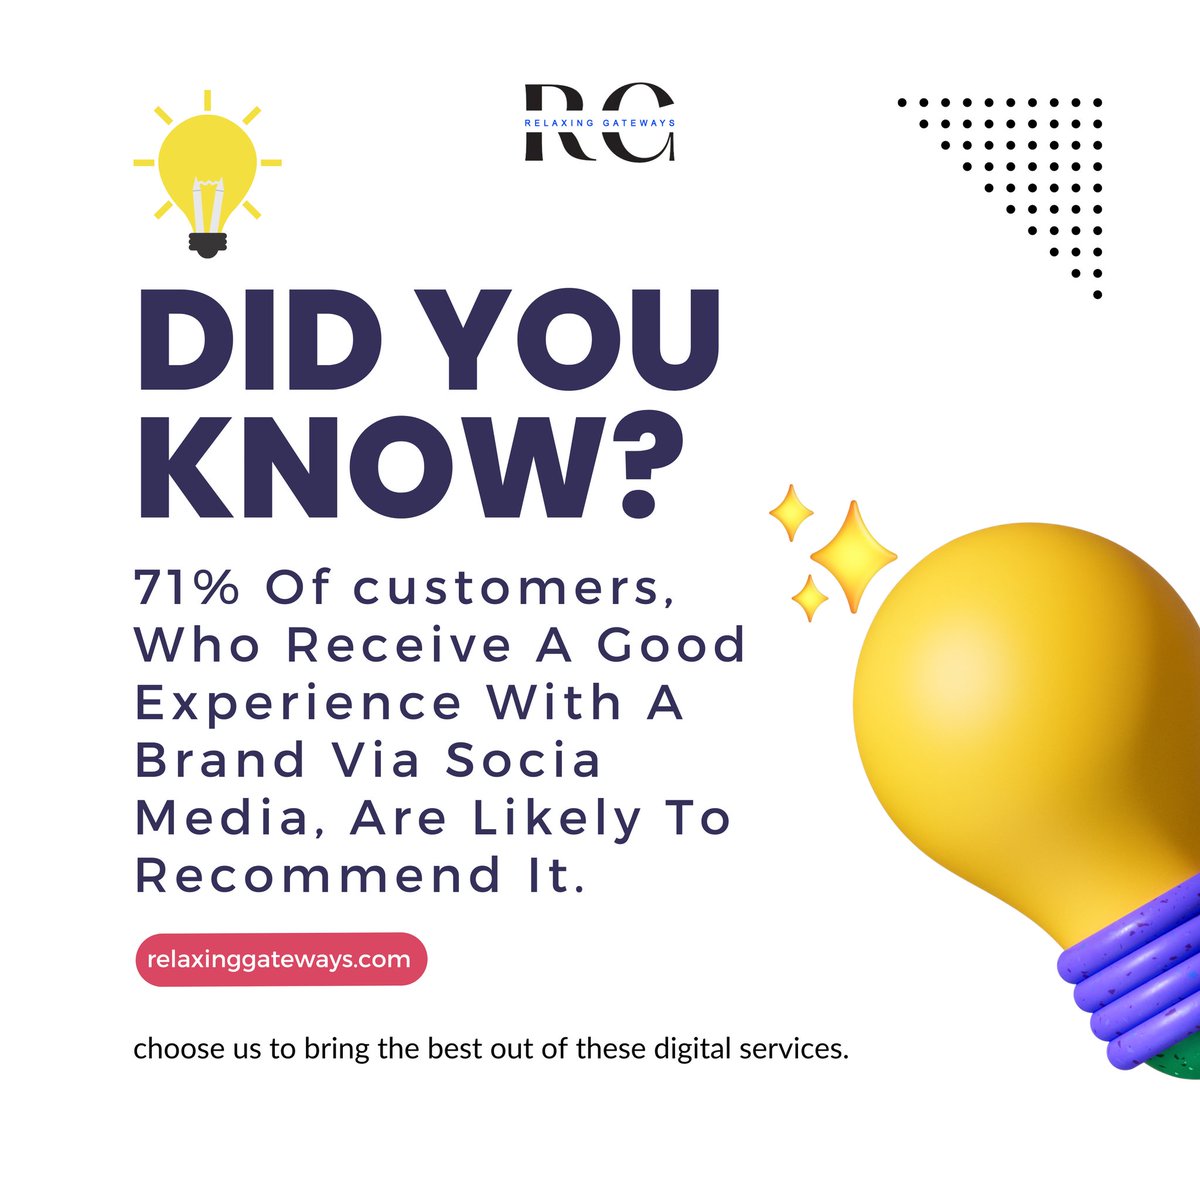 Are you also looking for a result-driven social media marketing services? If yes, call us at 
+91 9997999698

#socialmedia #socialmediamarketing #socialmediastrategy #socialmediaexpert #socialmediamarketingtips #socialmediaagency #digitalmarketingtrends #digitalmarketingfacts